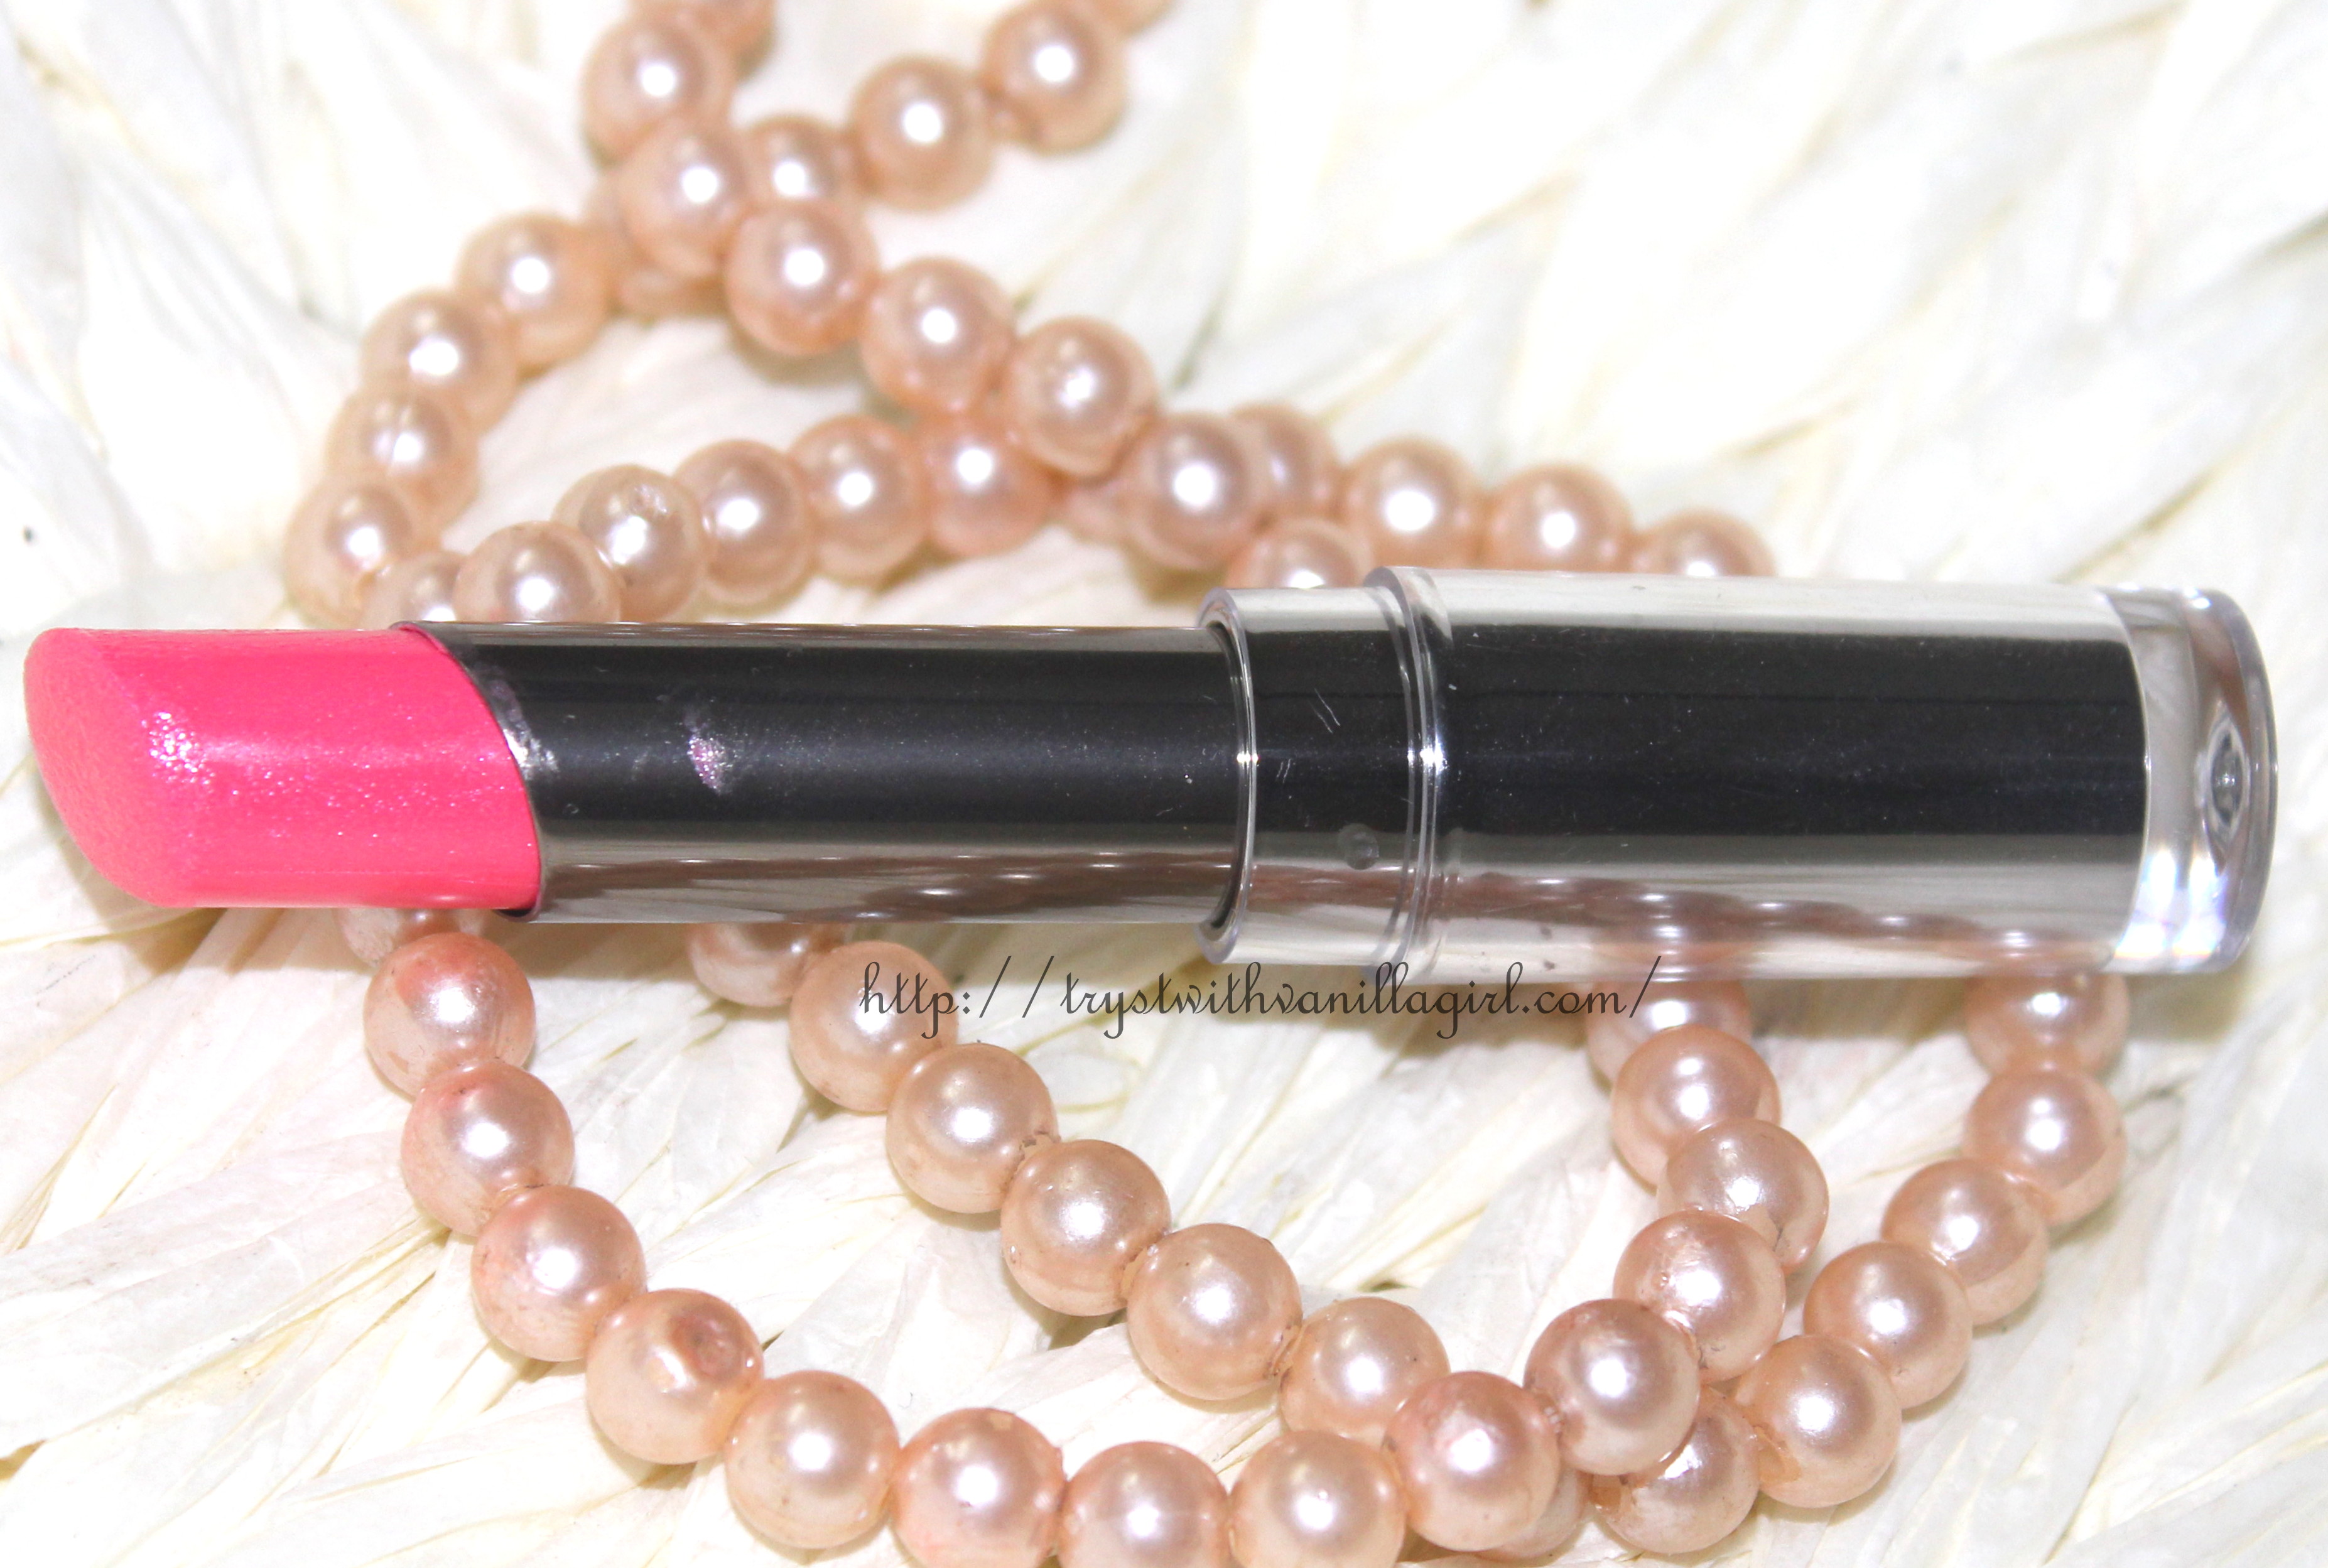 Lakme Absolute Gloss Addict Pink Temptation Review,Swatch,Photos